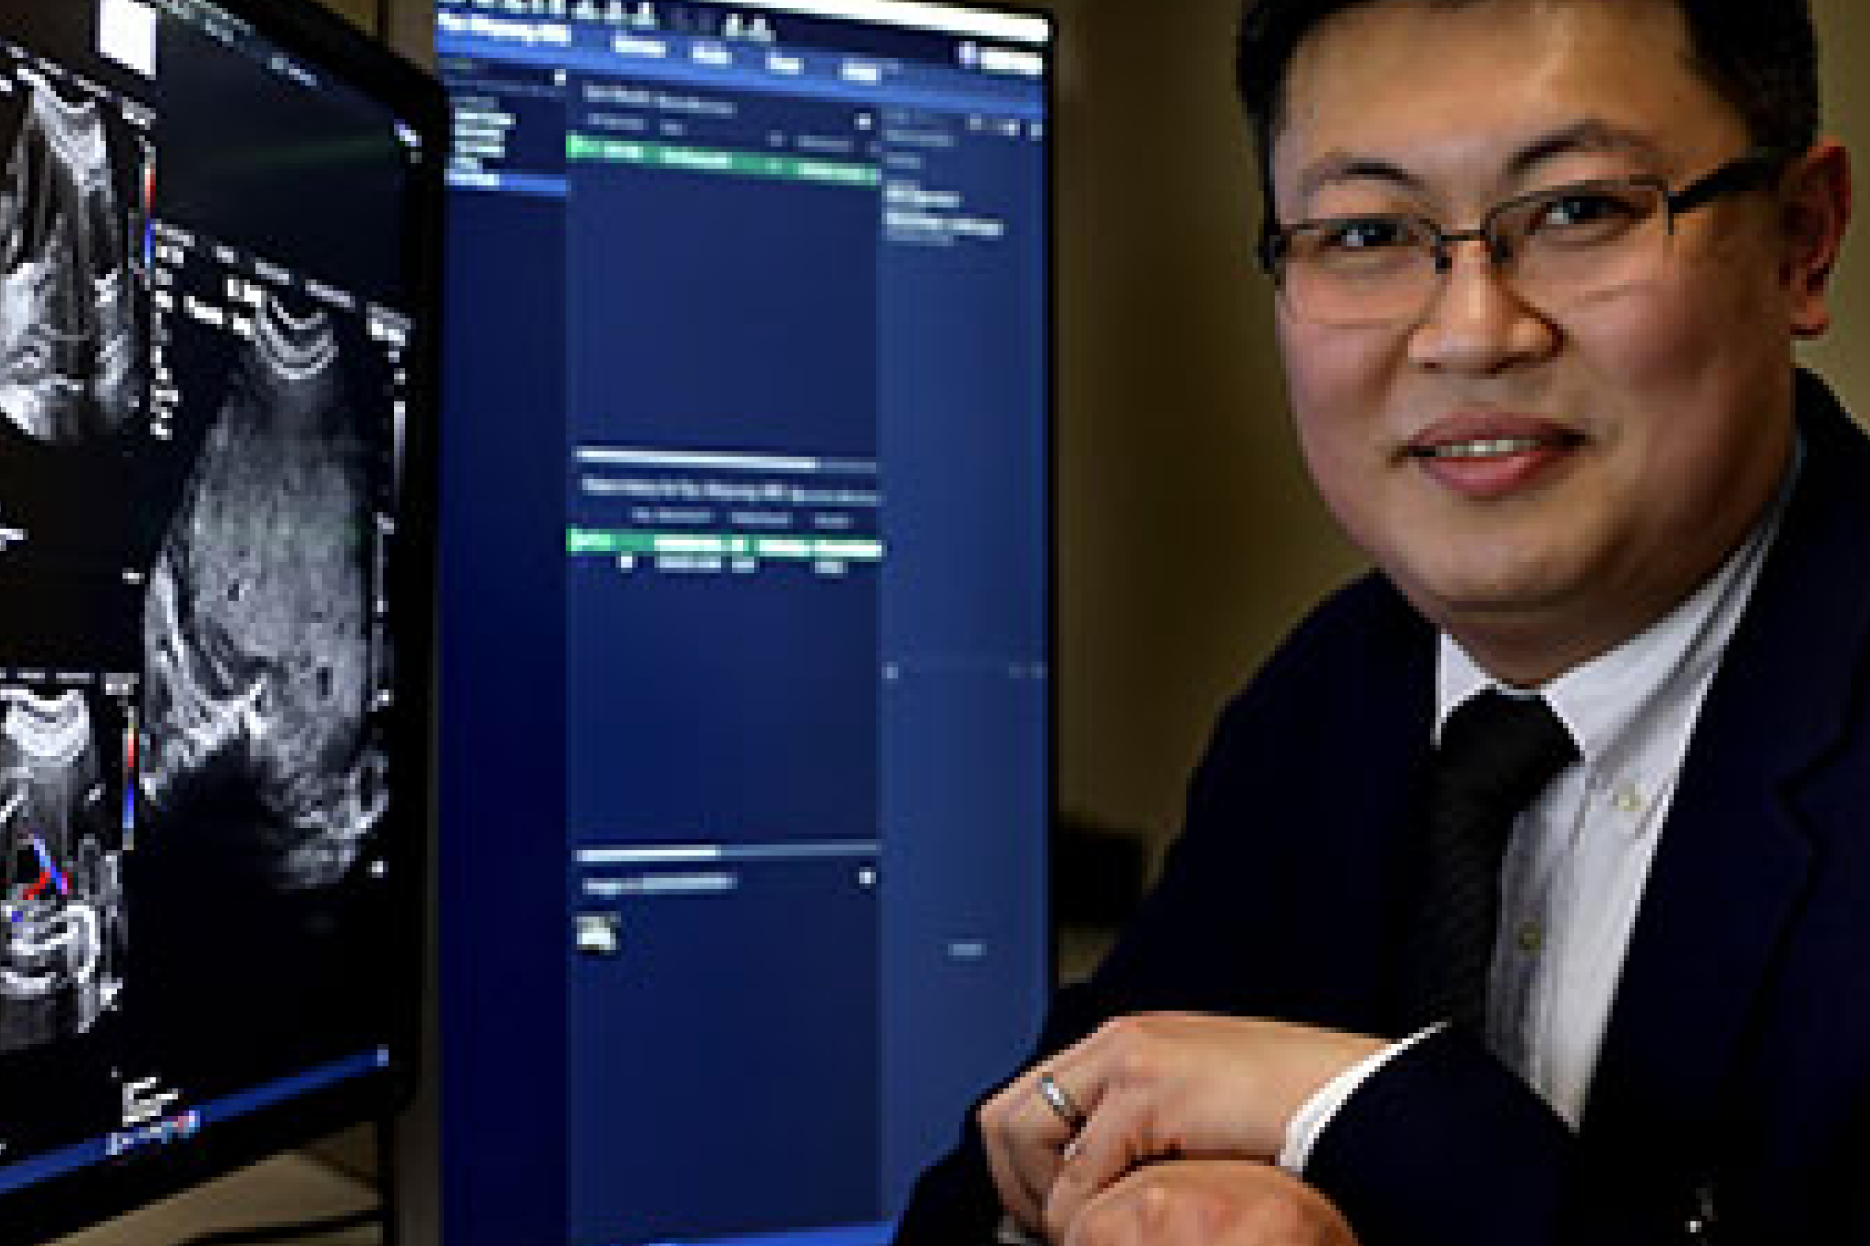 Dr Chun Yee Tan, Auburn Hospital’s Director of Medical Services, celebrates the first roll-out of NSW Health’s new medical imaging platform